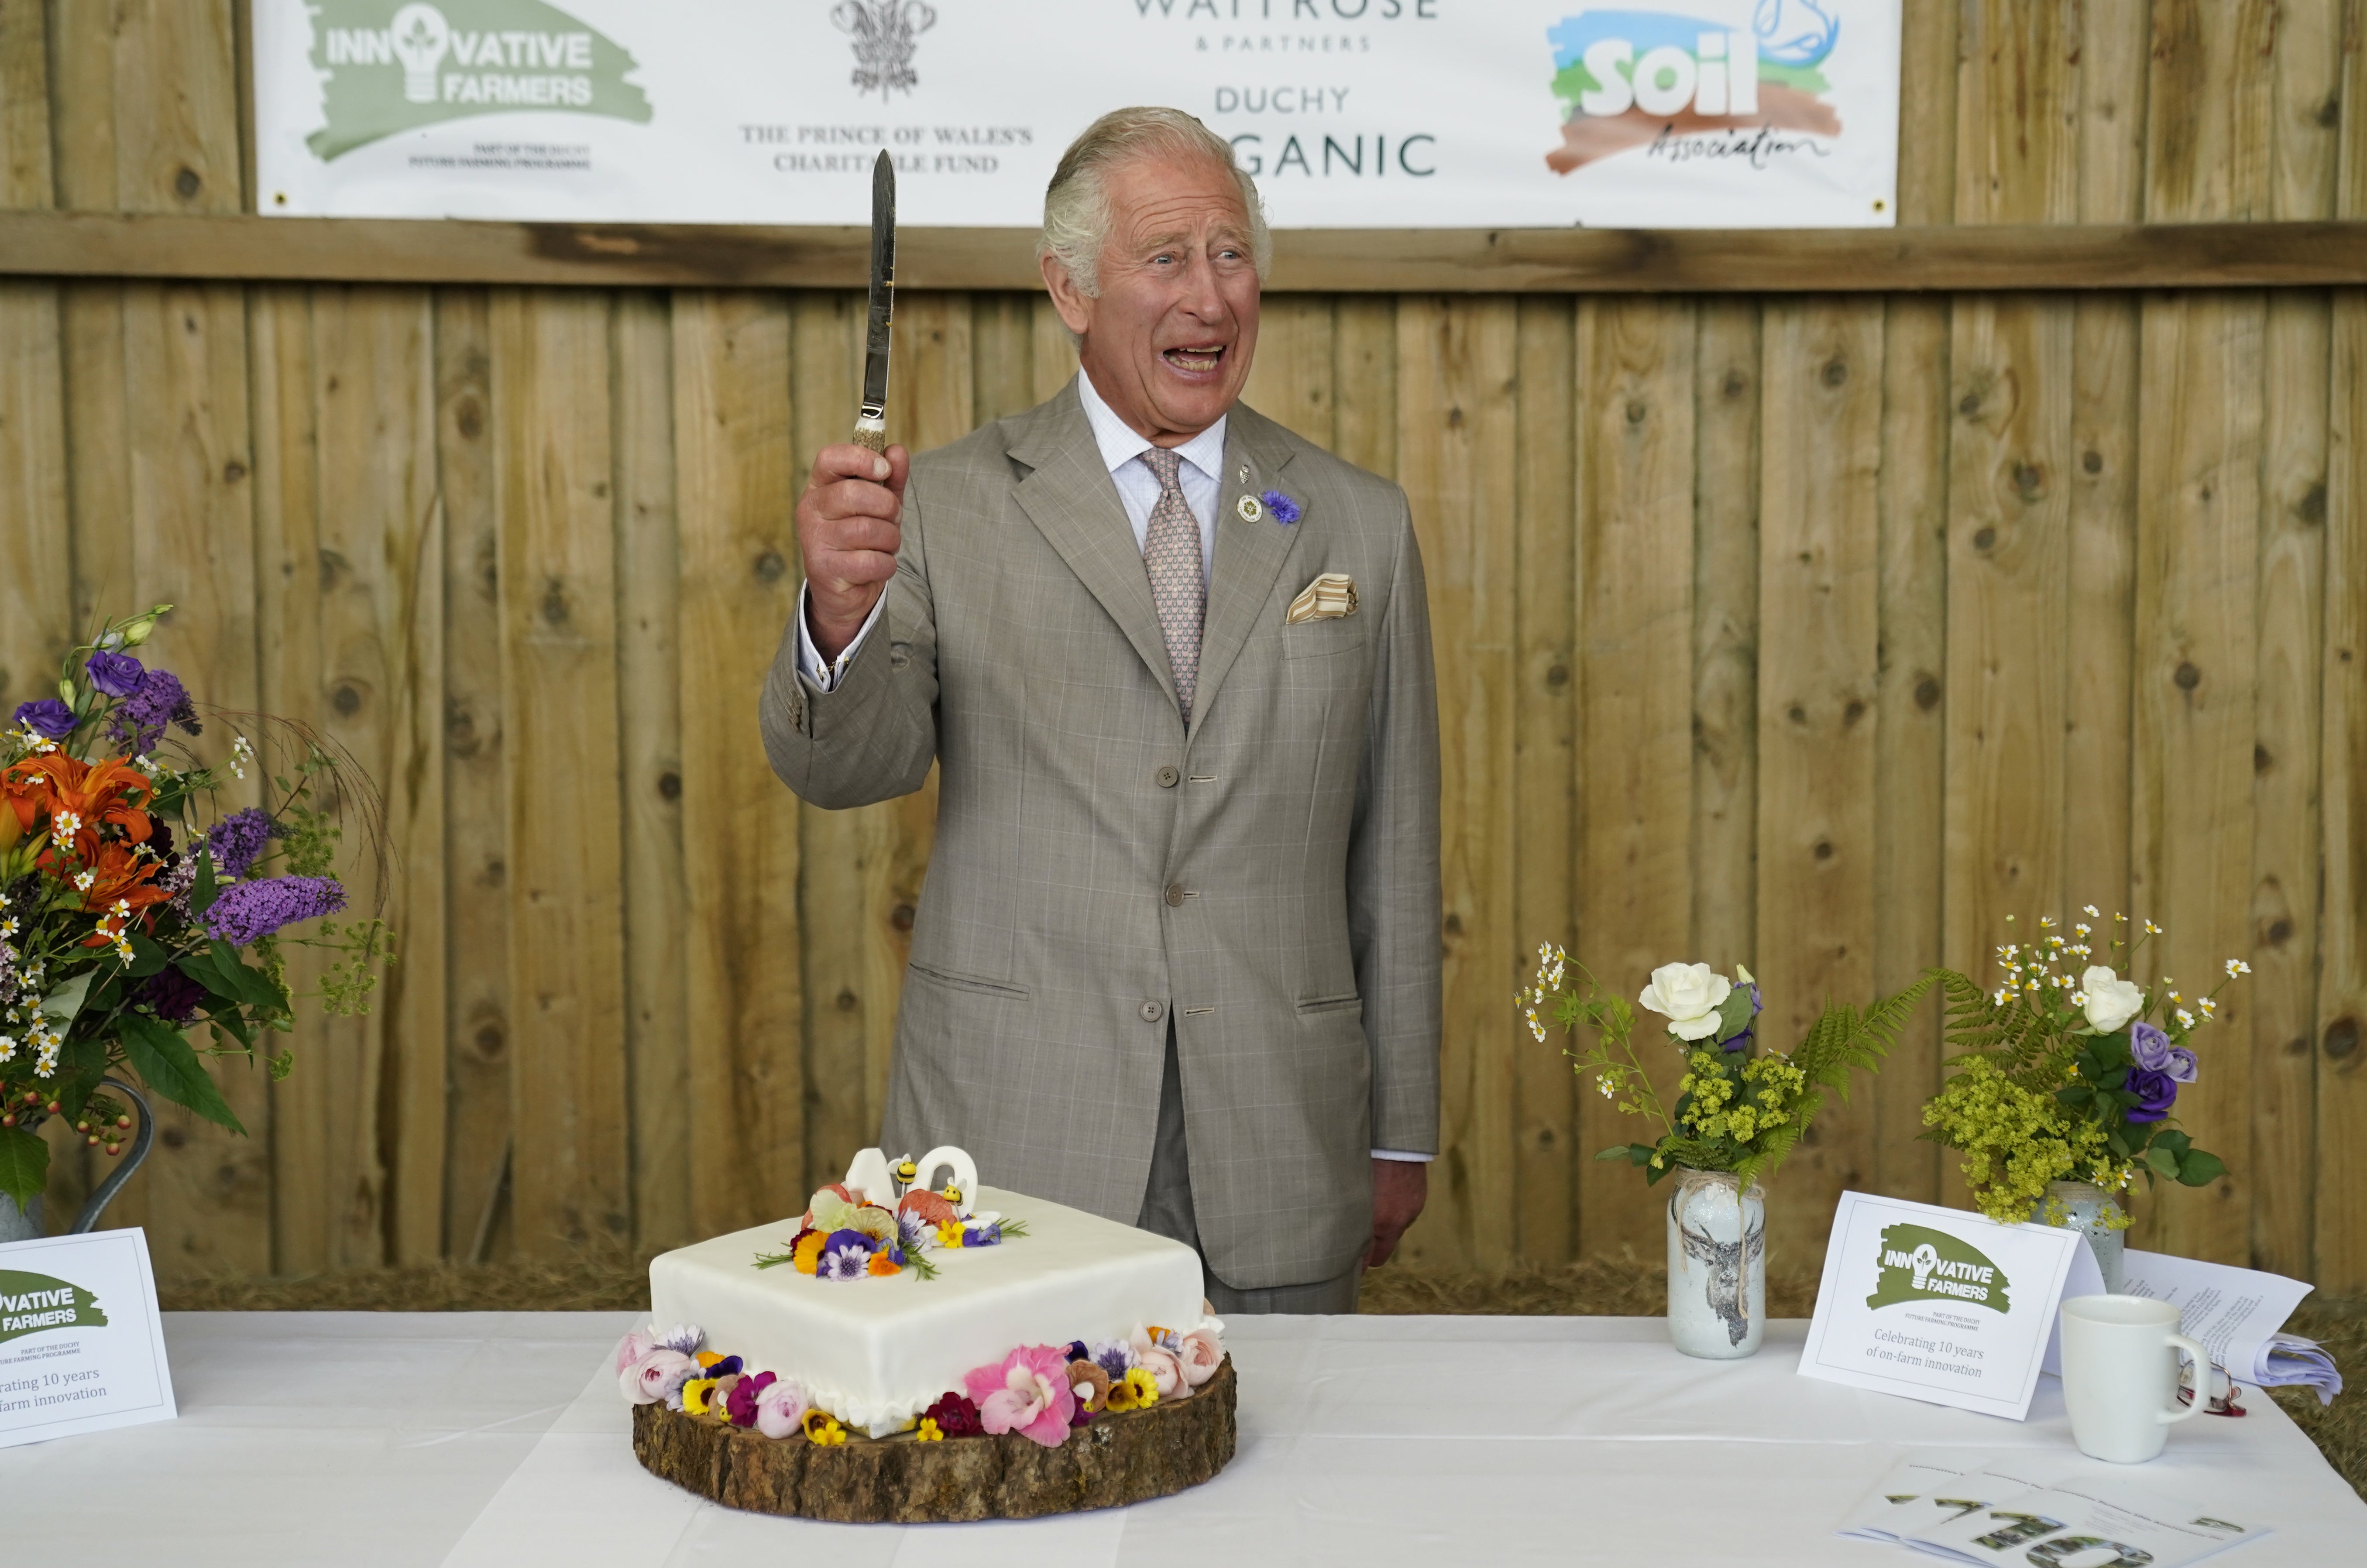 The Prince of Wales cuts a celebratory cake as he attends the Innovative Farmers 10th anniversary at Trefranck Farm, near Launceston (Andrew Matthews/PA)